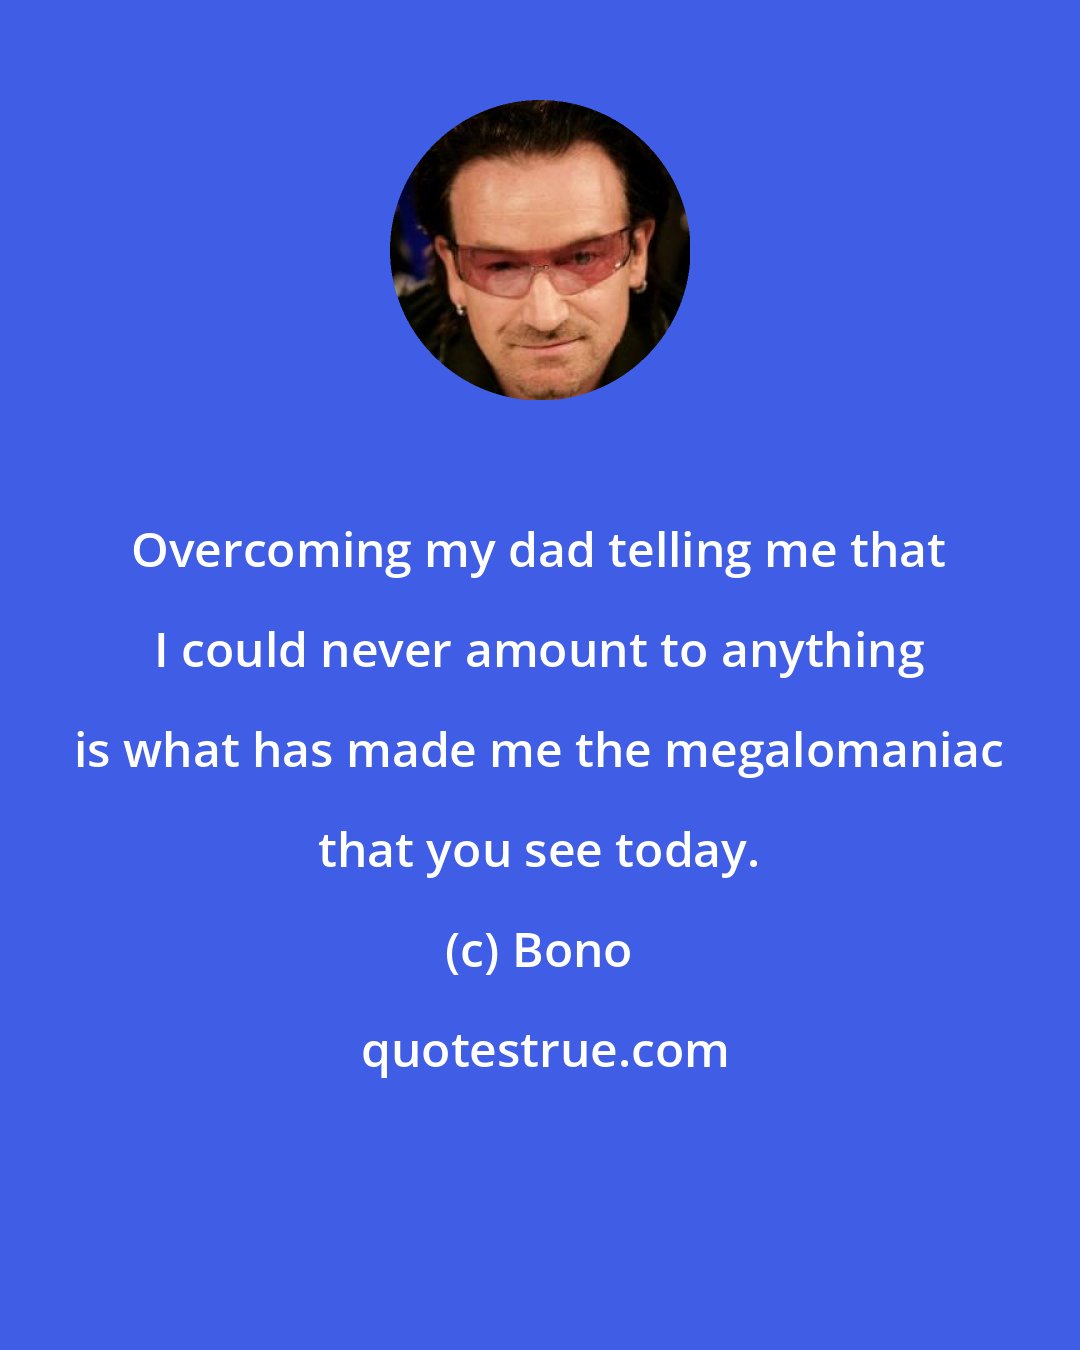 Bono: Overcoming my dad telling me that I could never amount to anything is what has made me the megalomaniac that you see today.